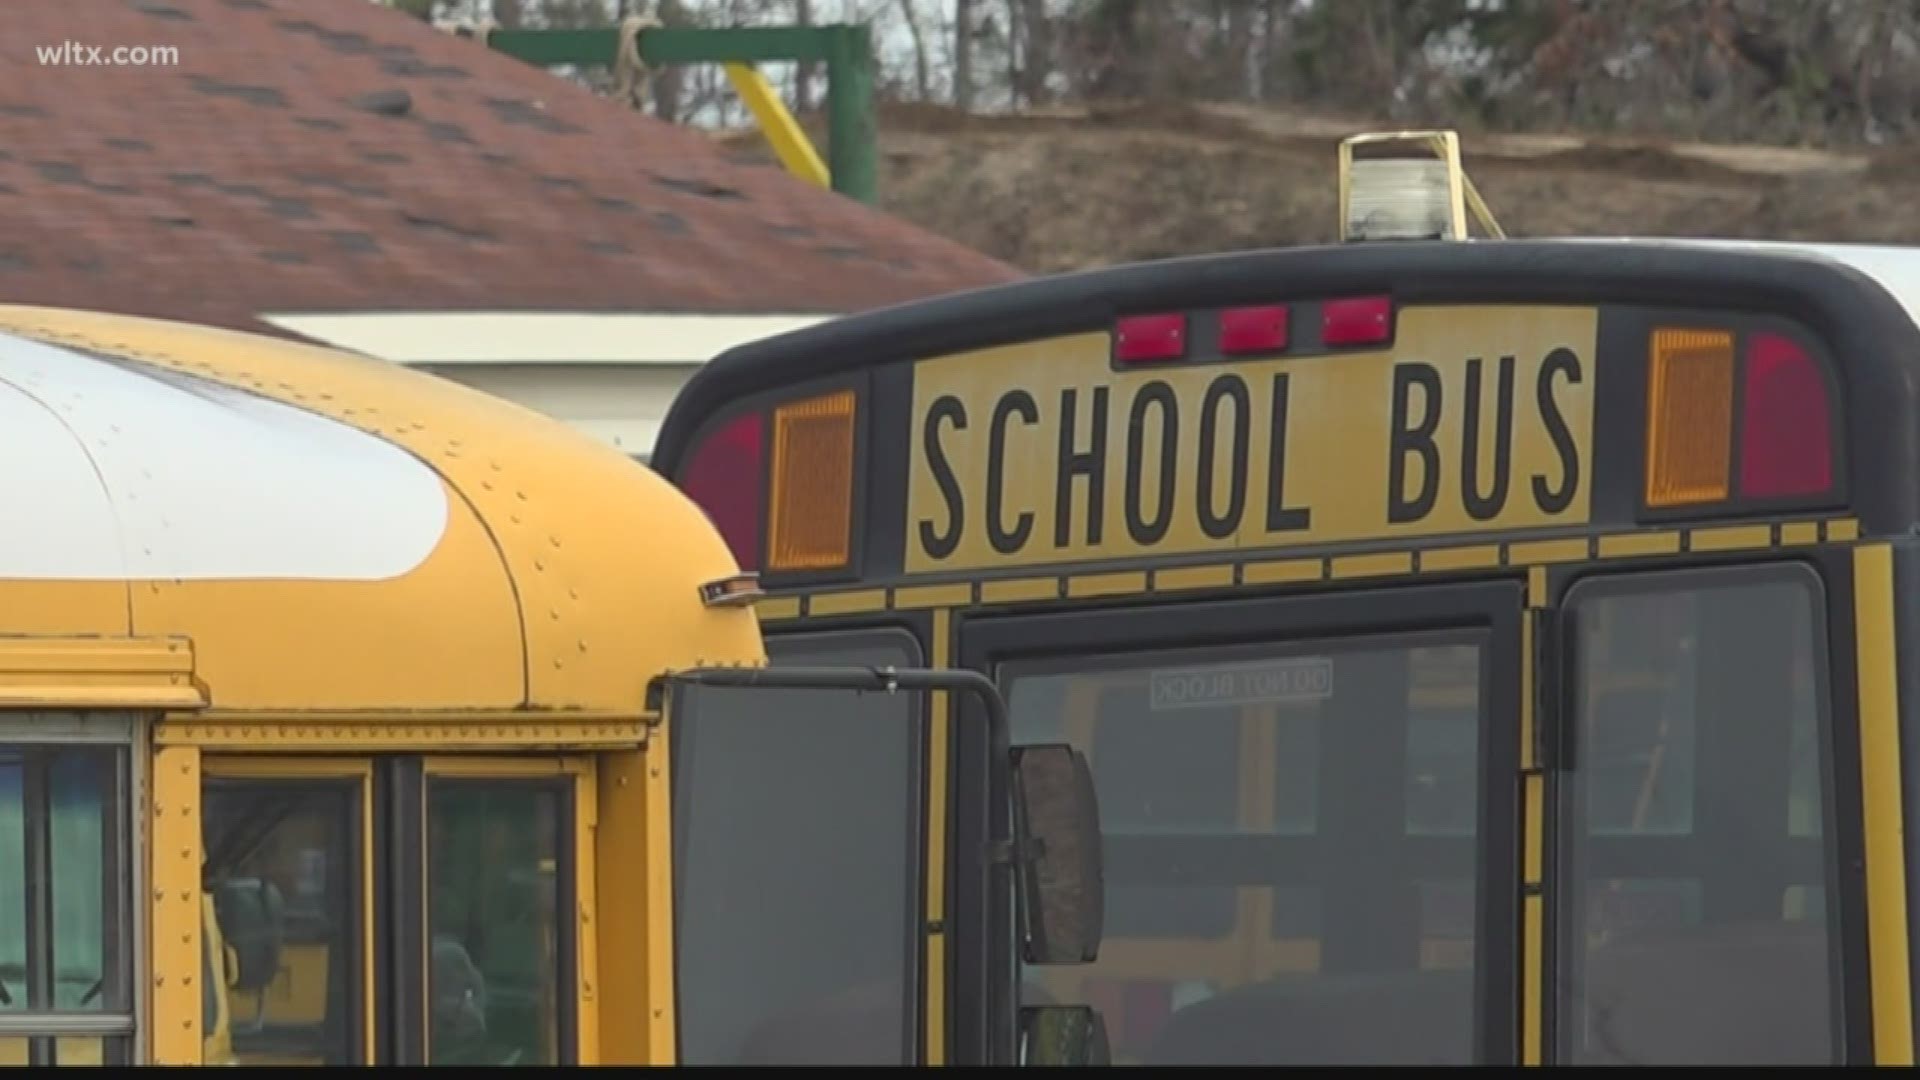 The superintendent says about 31 of the 33 busses were damaged or completely destroyed during the tornado.